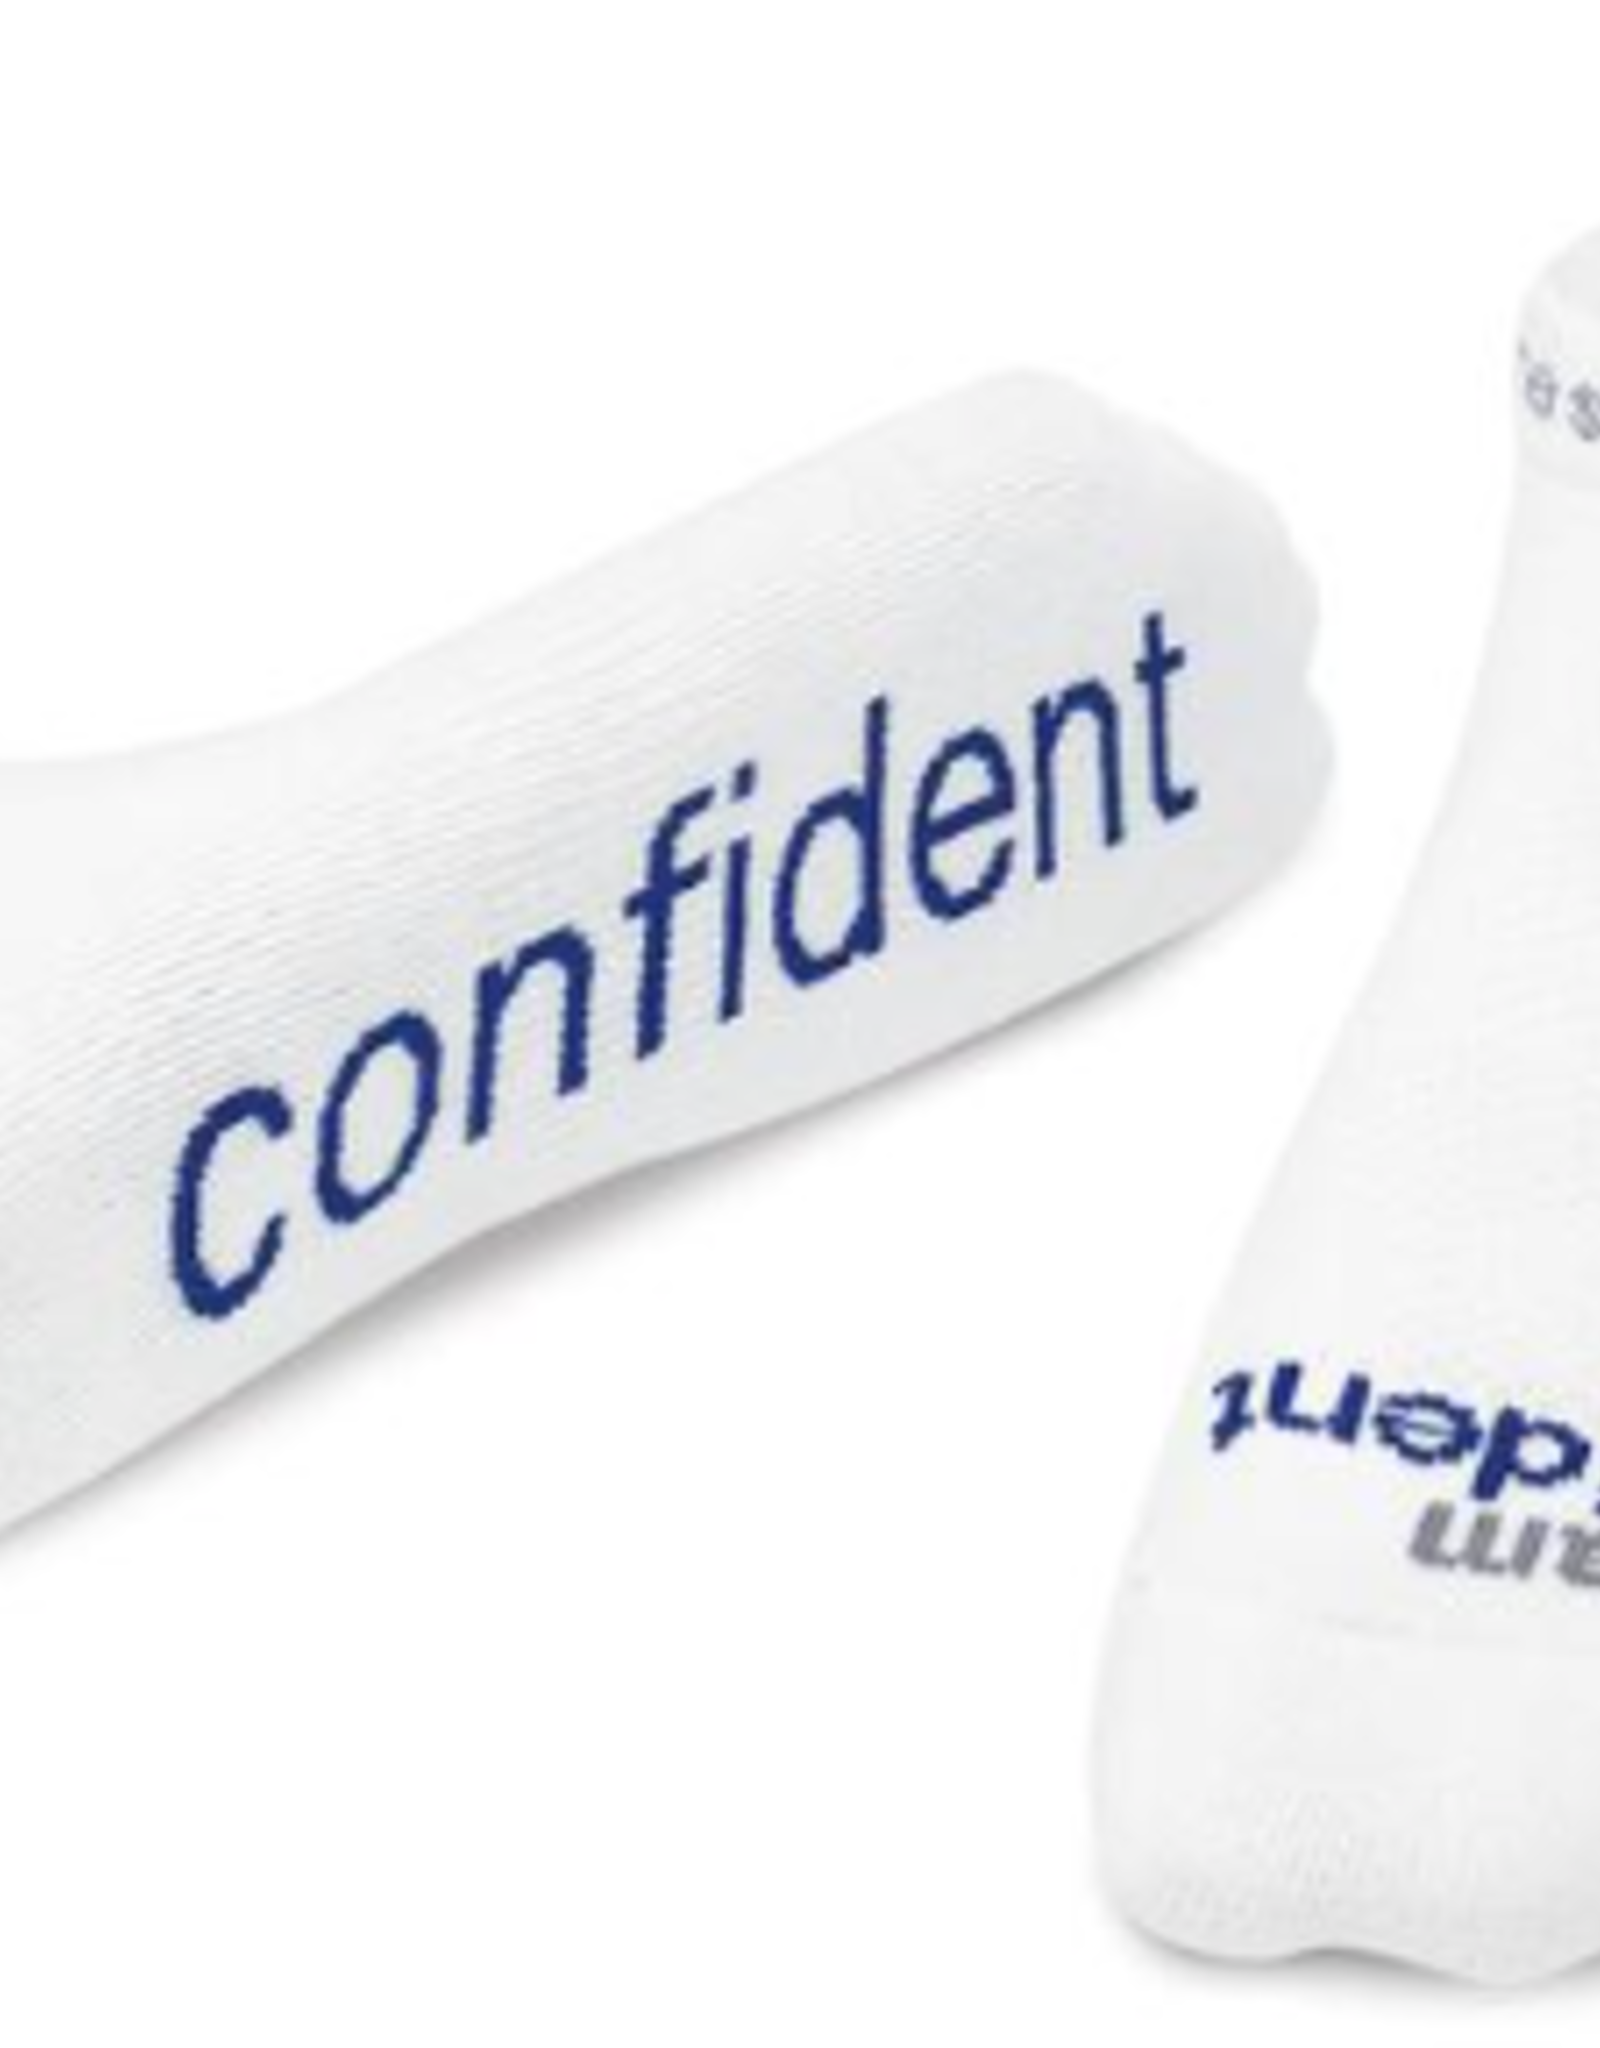 Apparel Bargain Barn - Notes to Self: Confident White/Blue - S